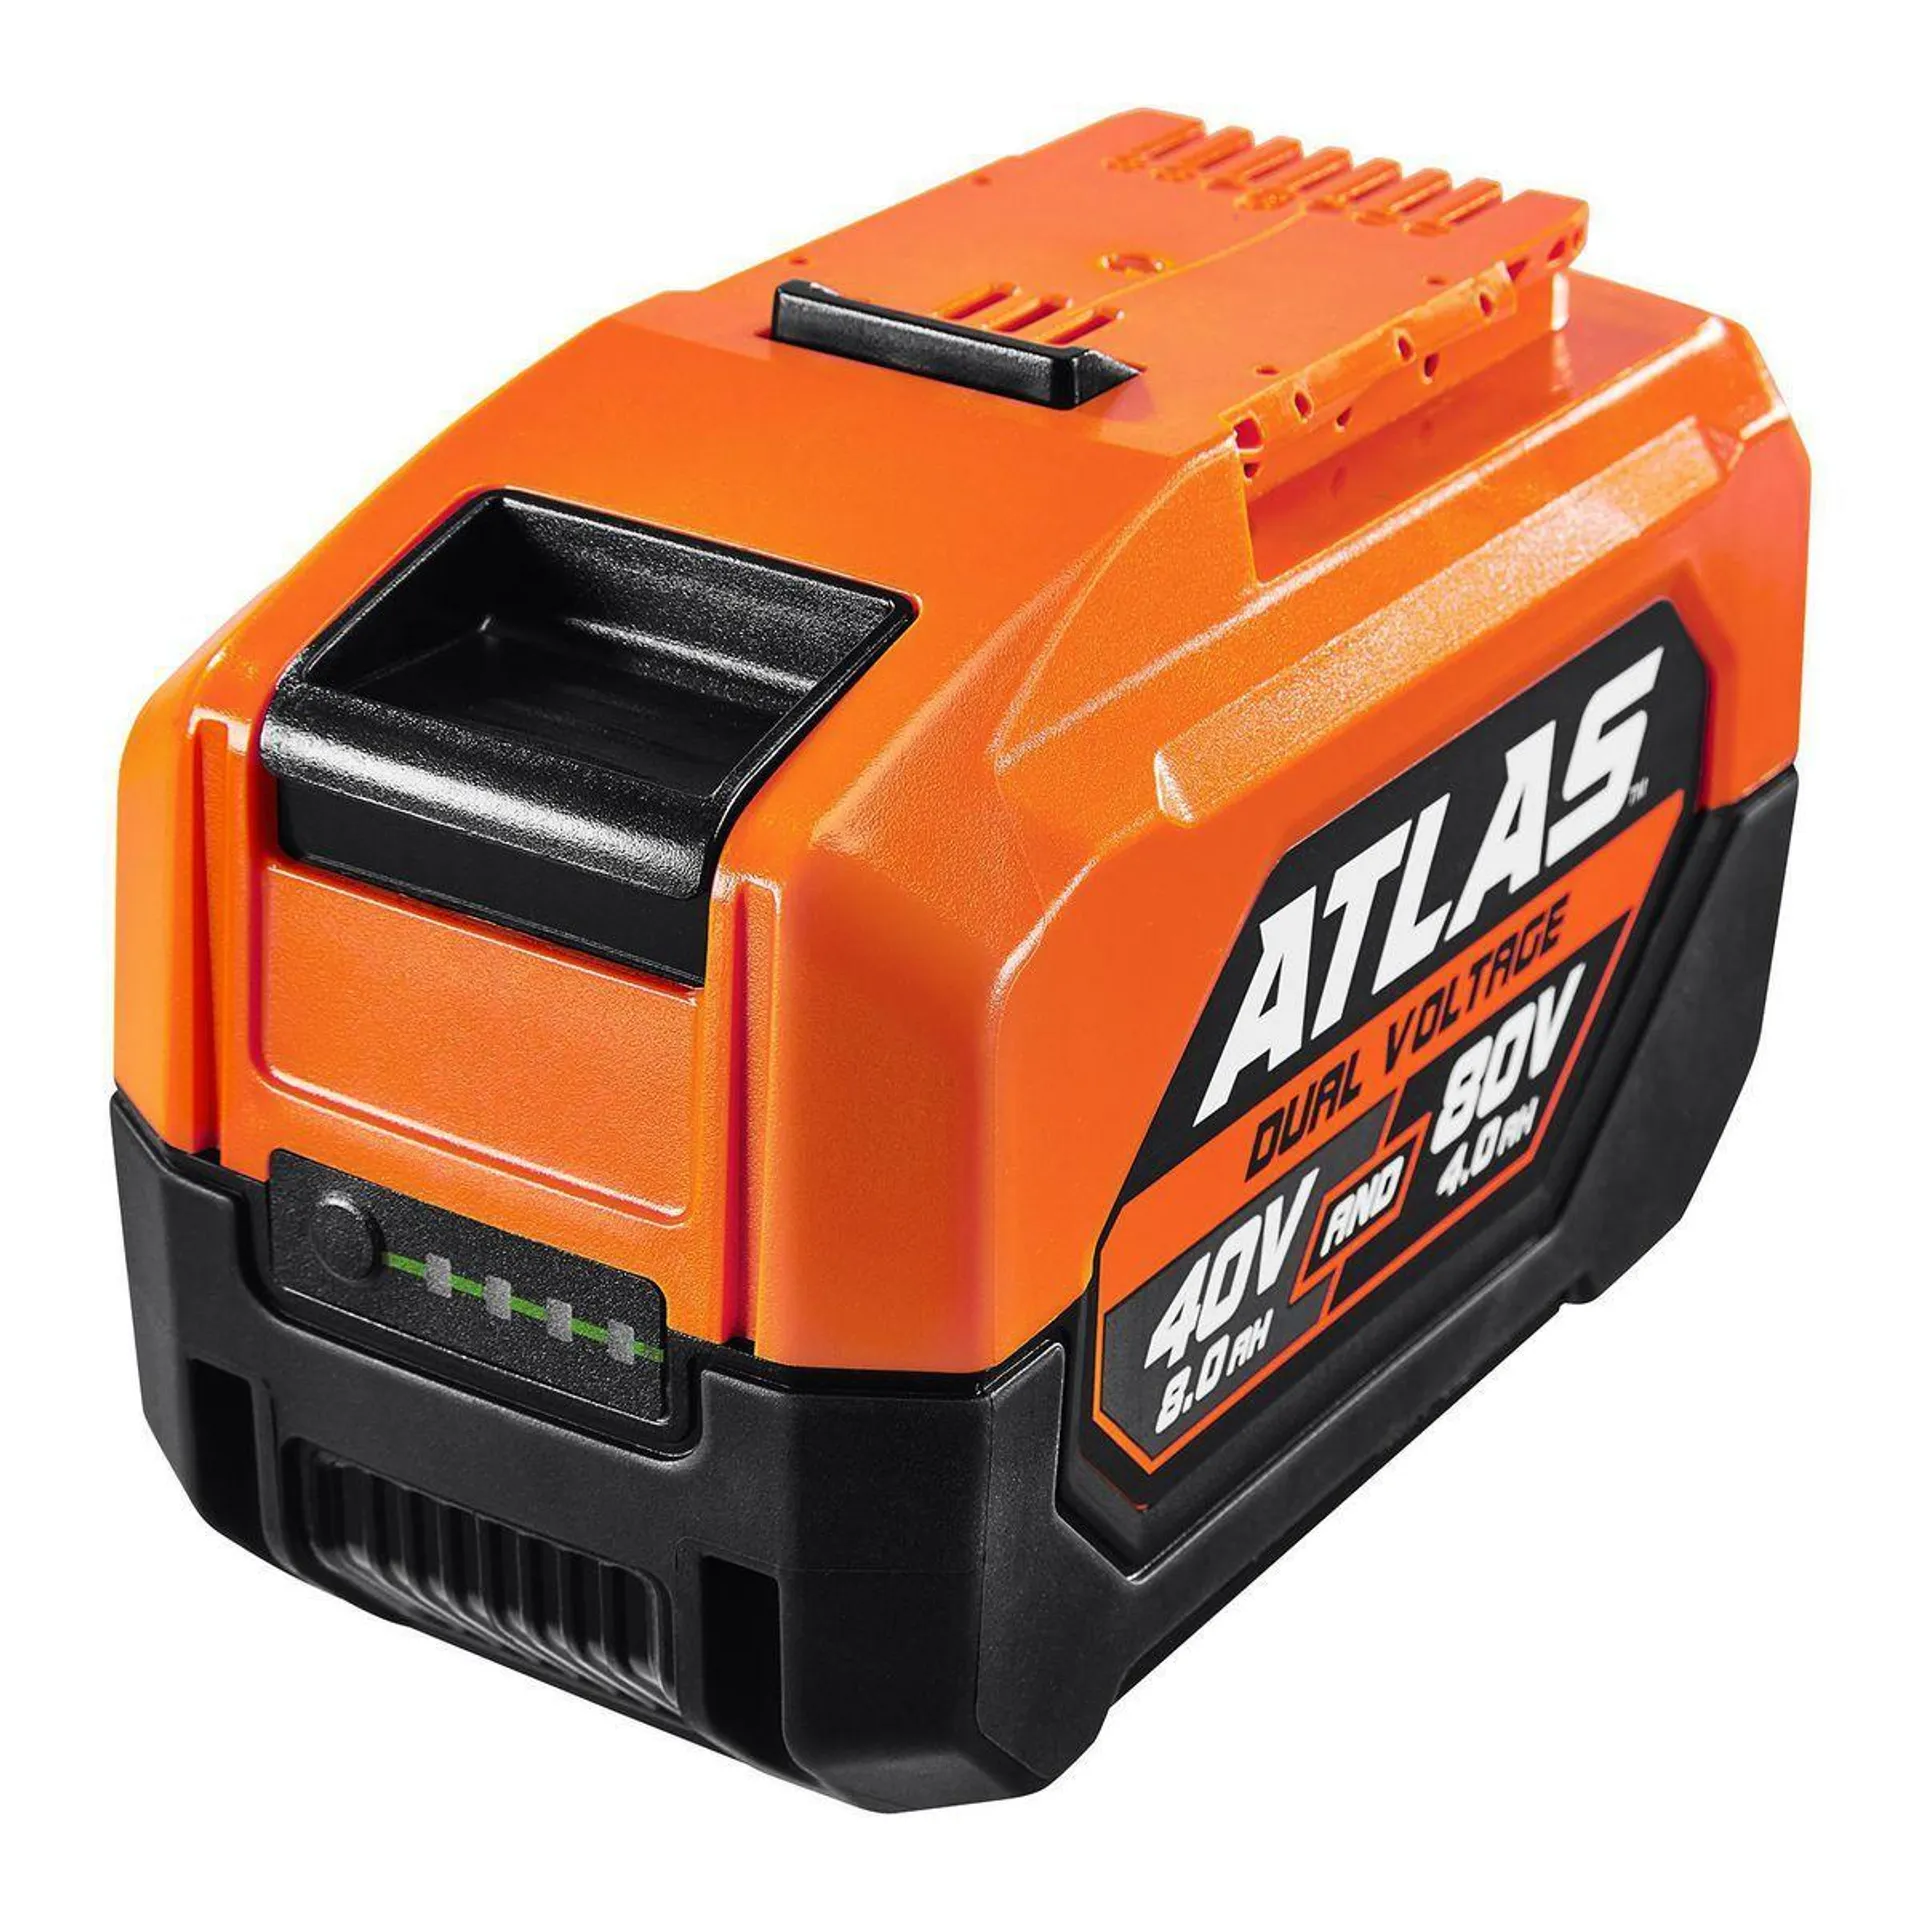 ATLAS 80V 4.0 Ah and 40V, 8.0 Ah Extreme Performance Lithium-Ion Battery